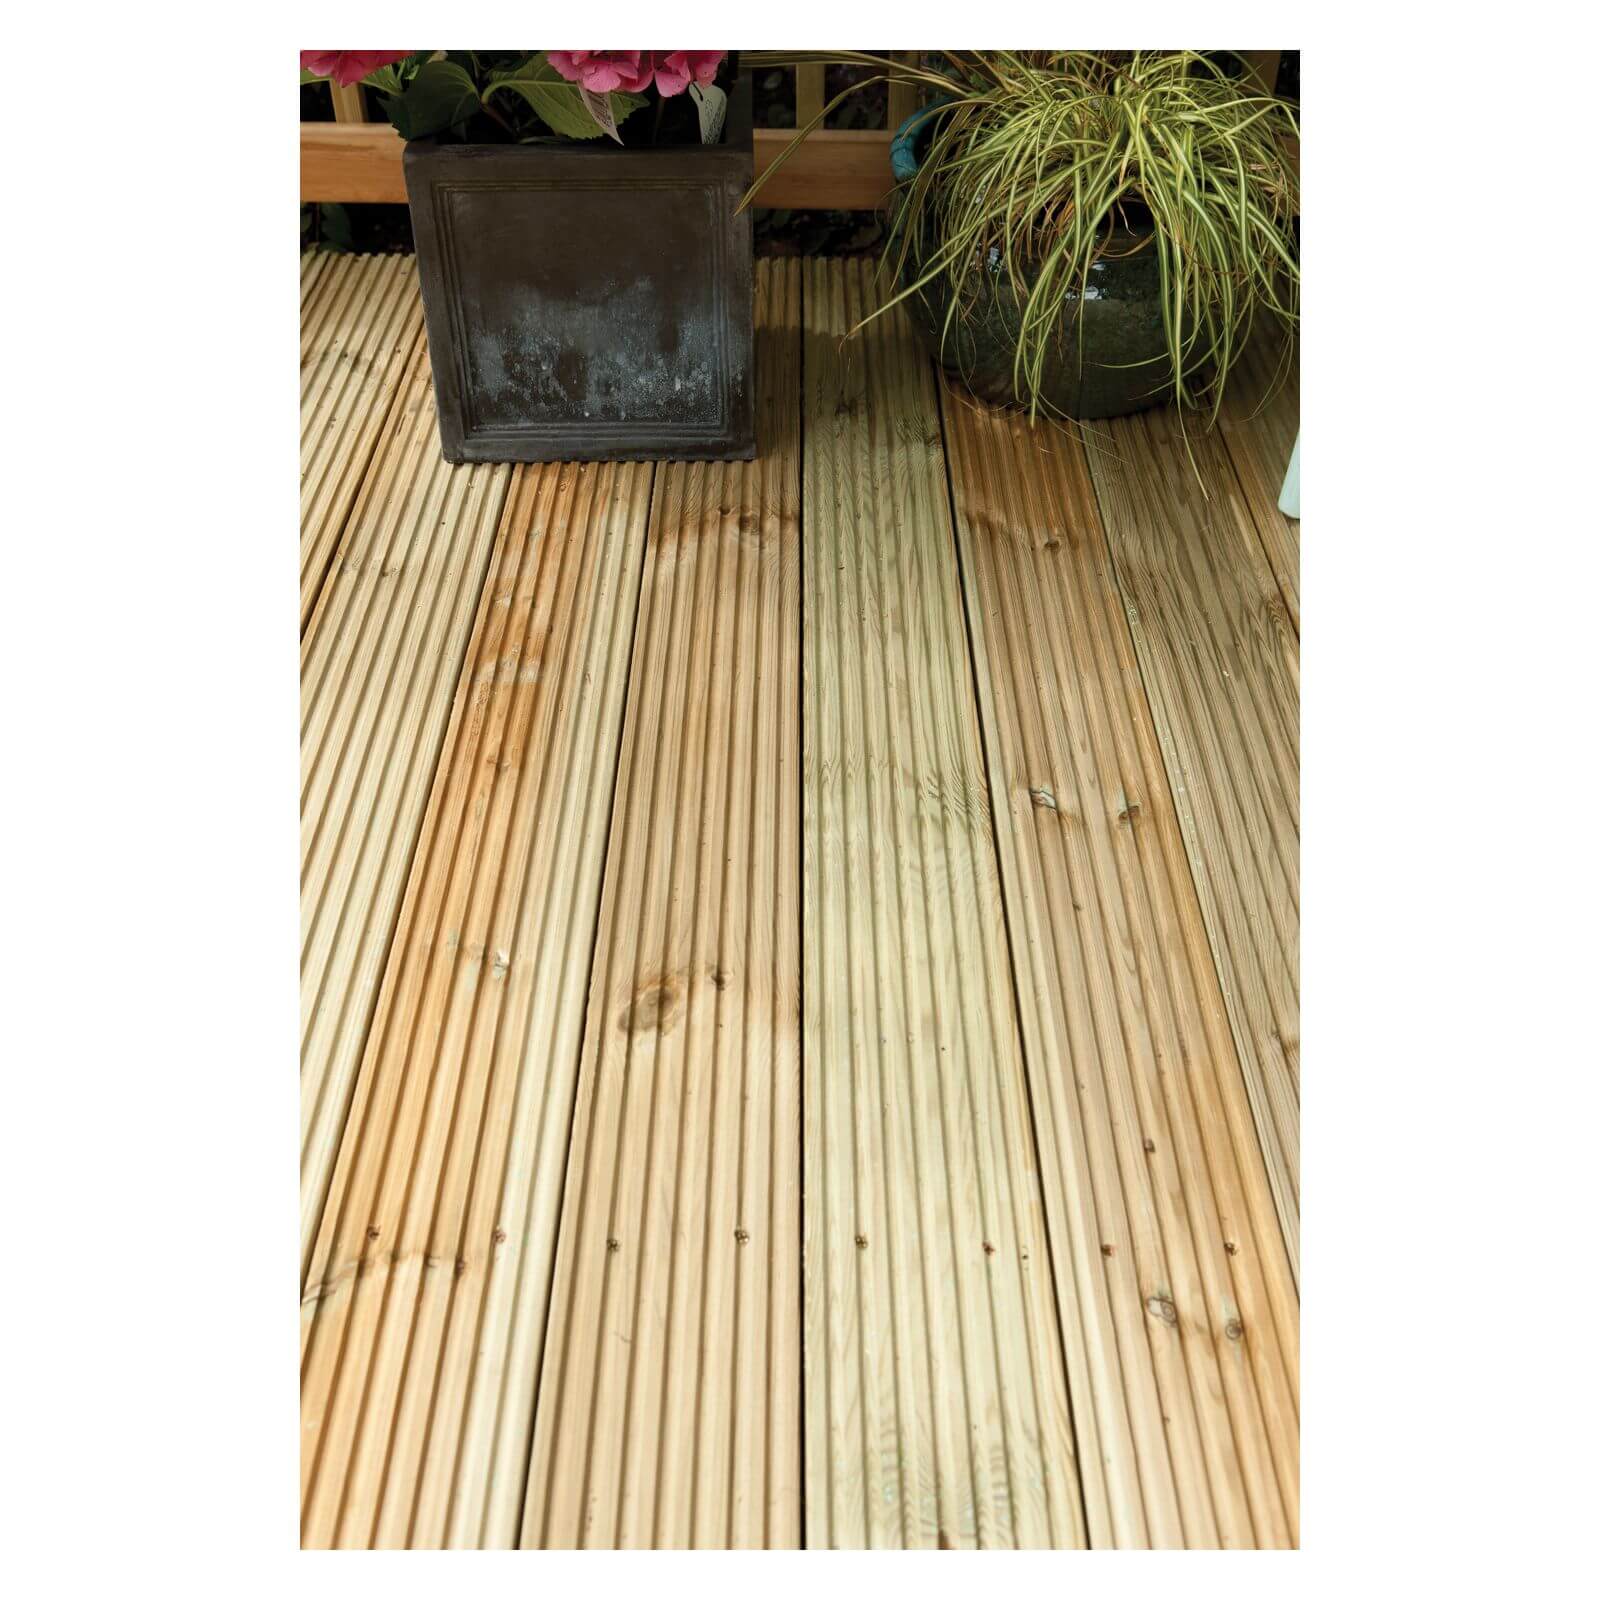 Photo of Forest Value Deckboard - Pack Of 50